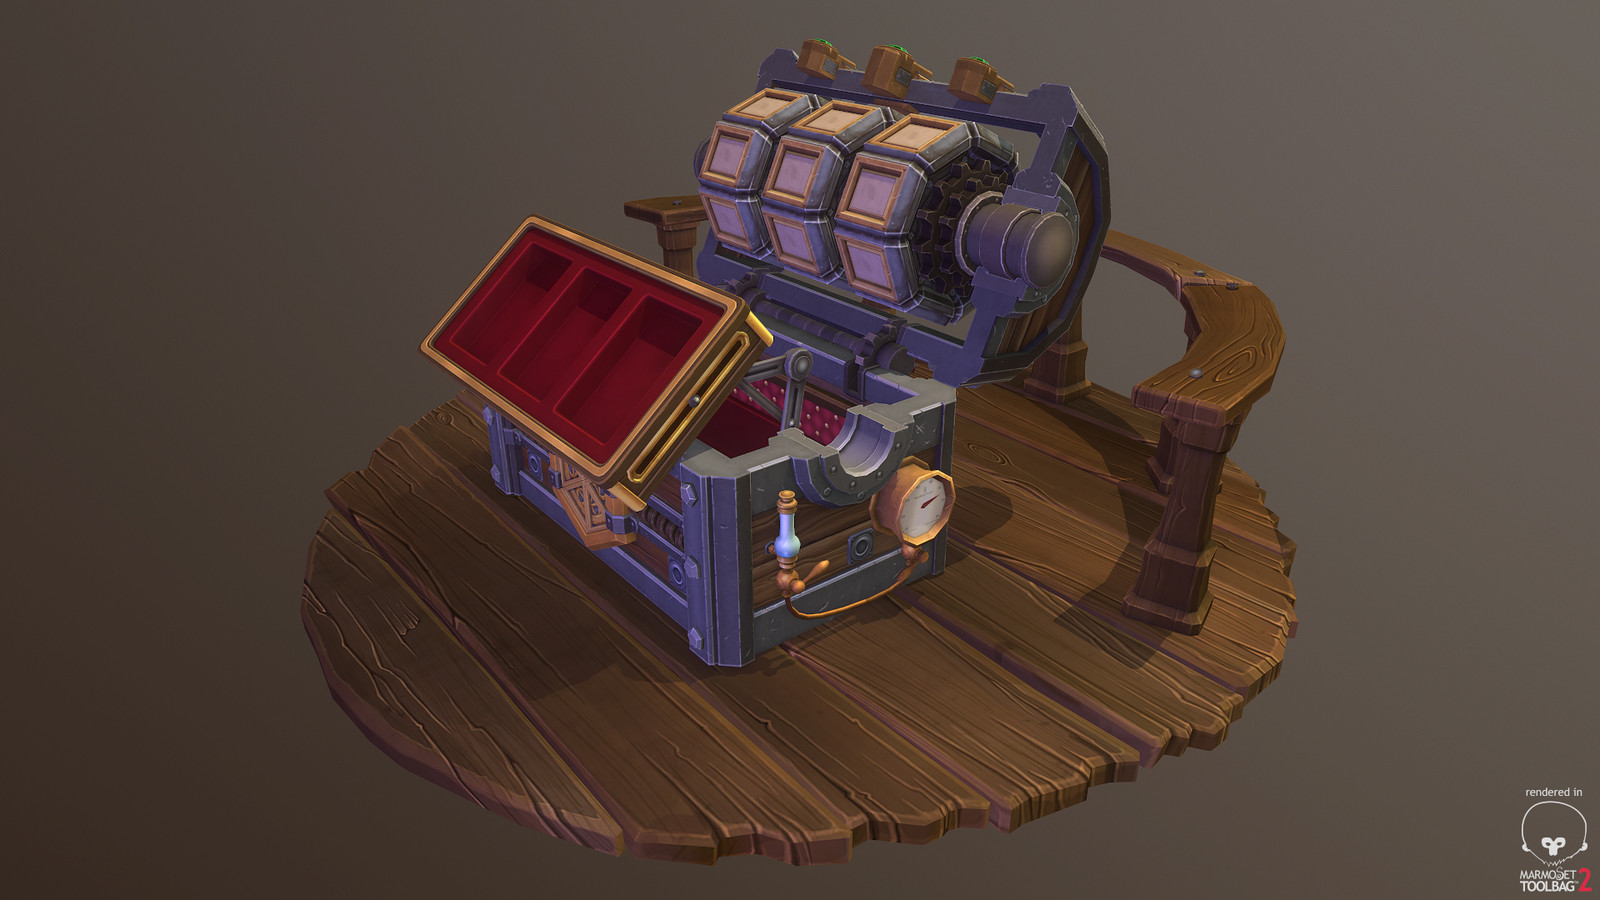 Uber Chest - Stage Three - Inner tray animates up and out to present the player with their rewards!!